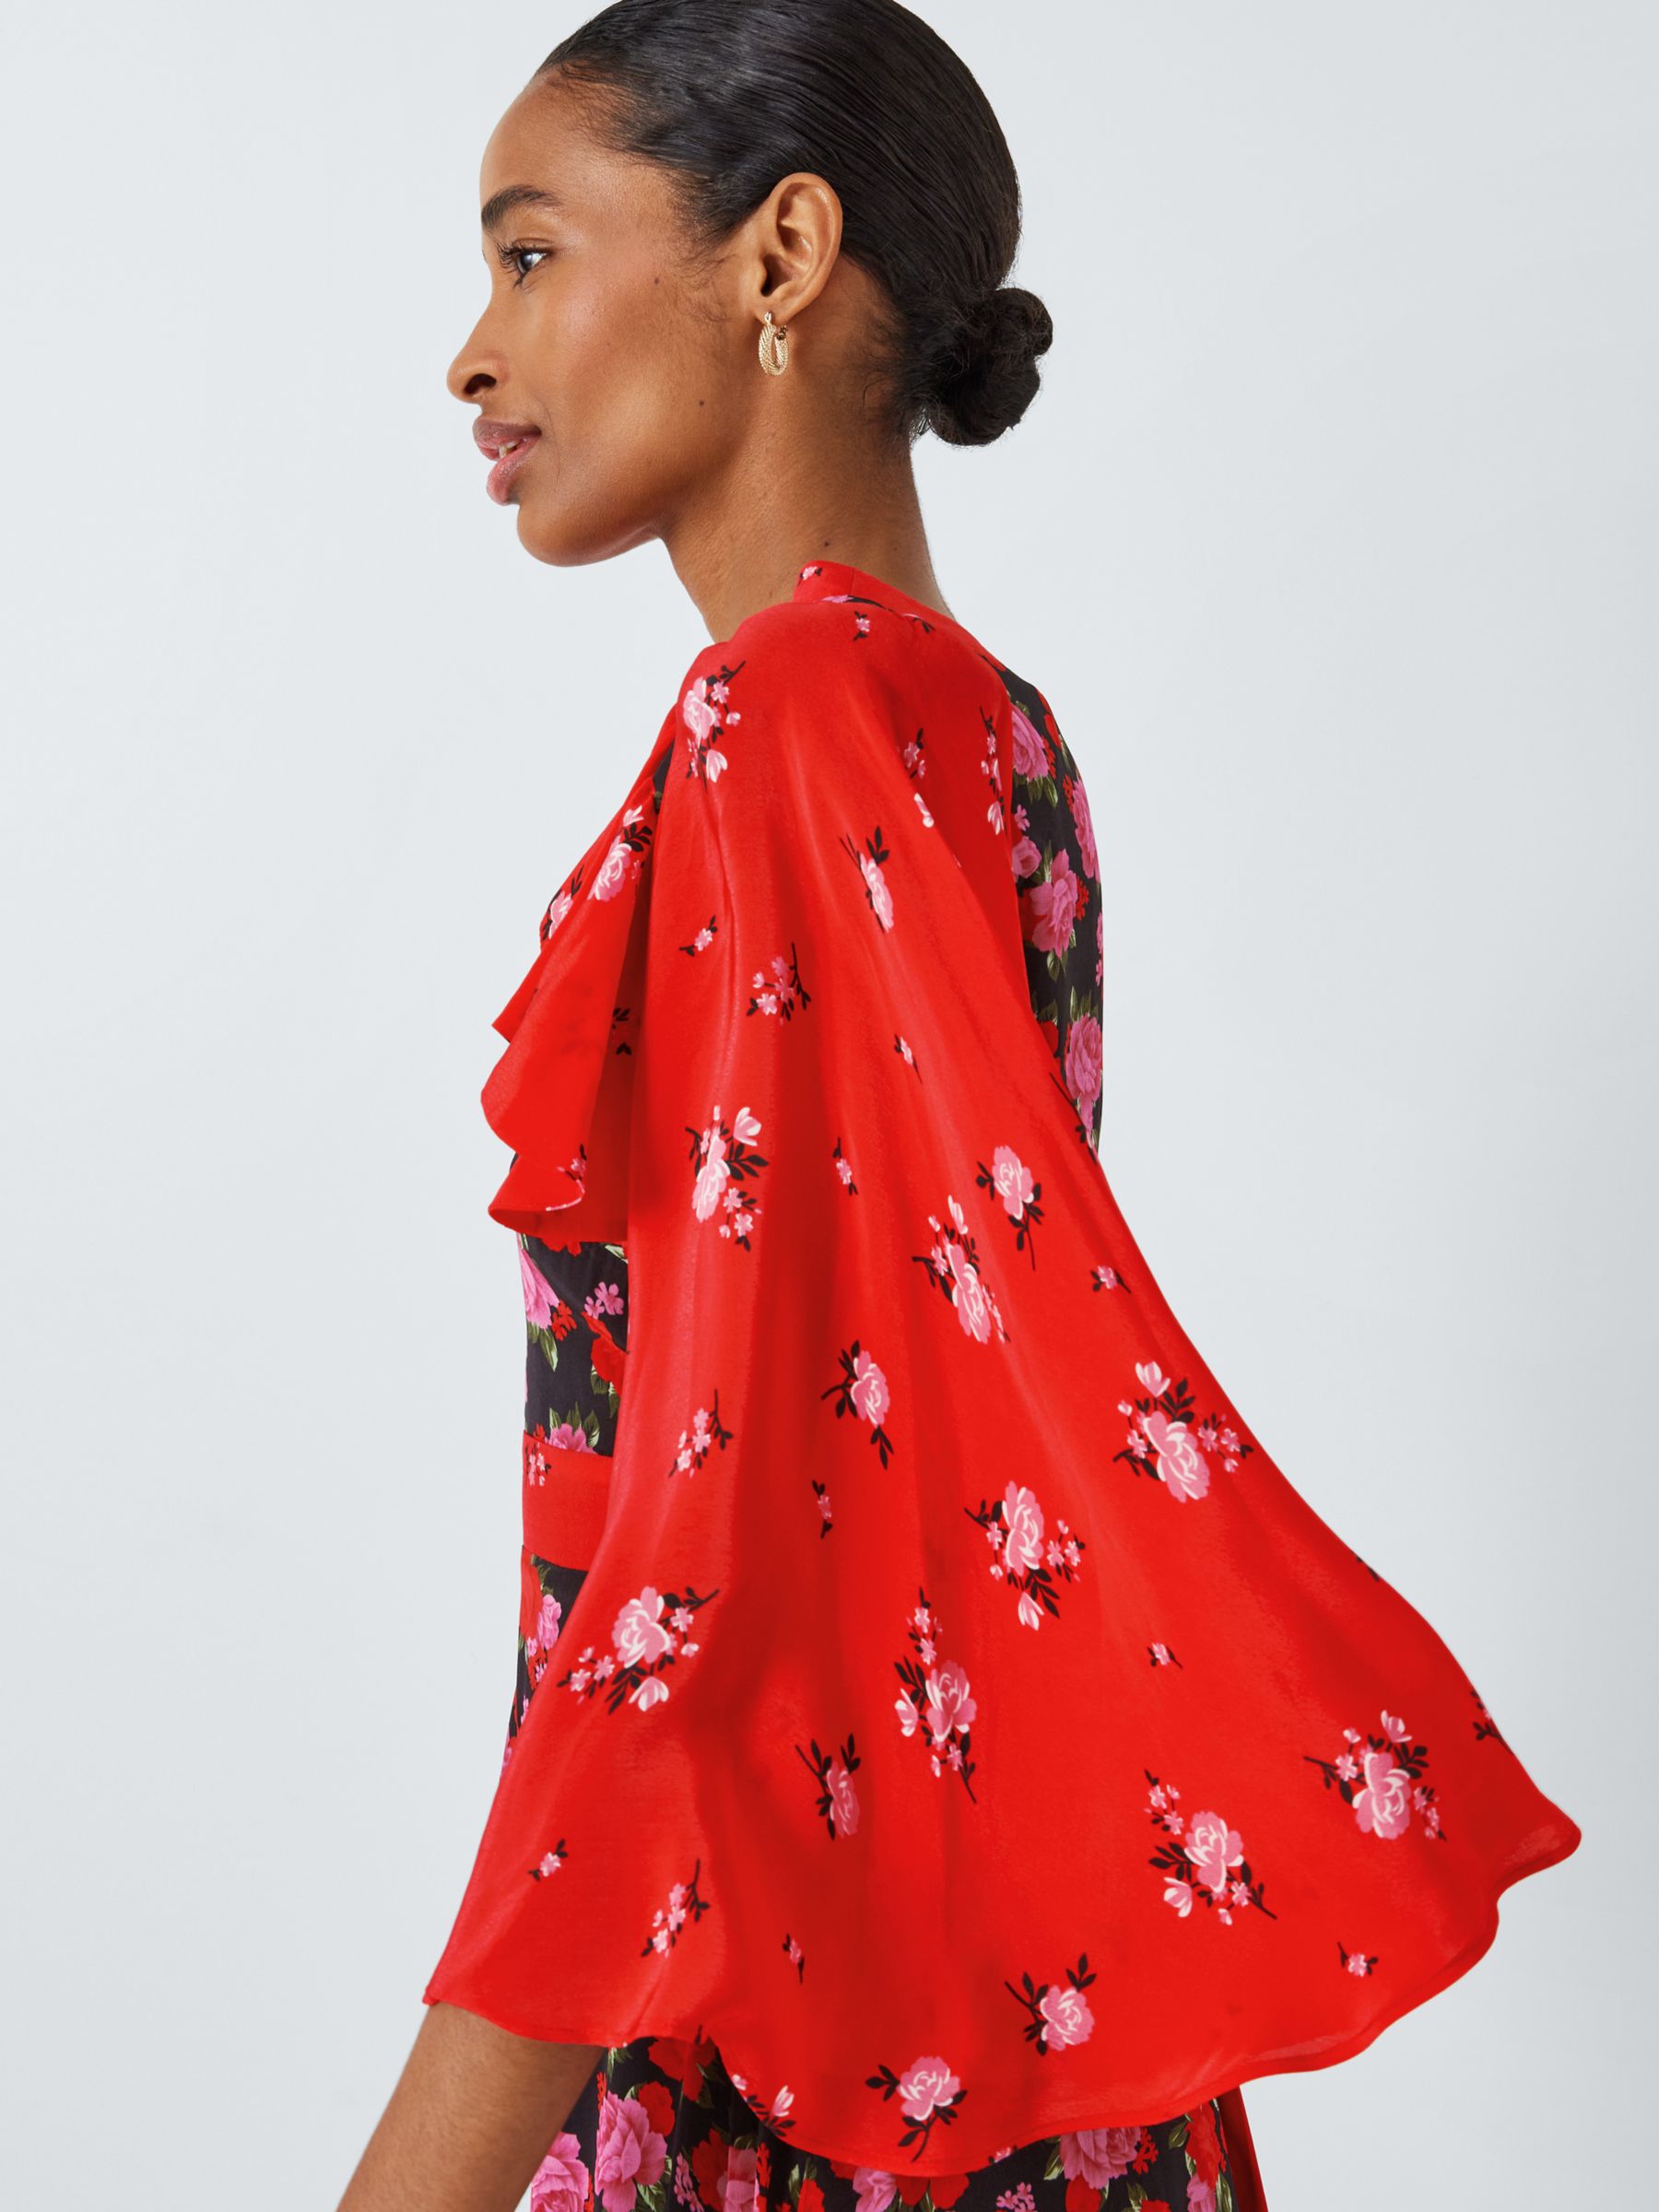 Buy Queens of archive Chrissie Rose Print Midi Dress, Red/Multi Online at johnlewis.com